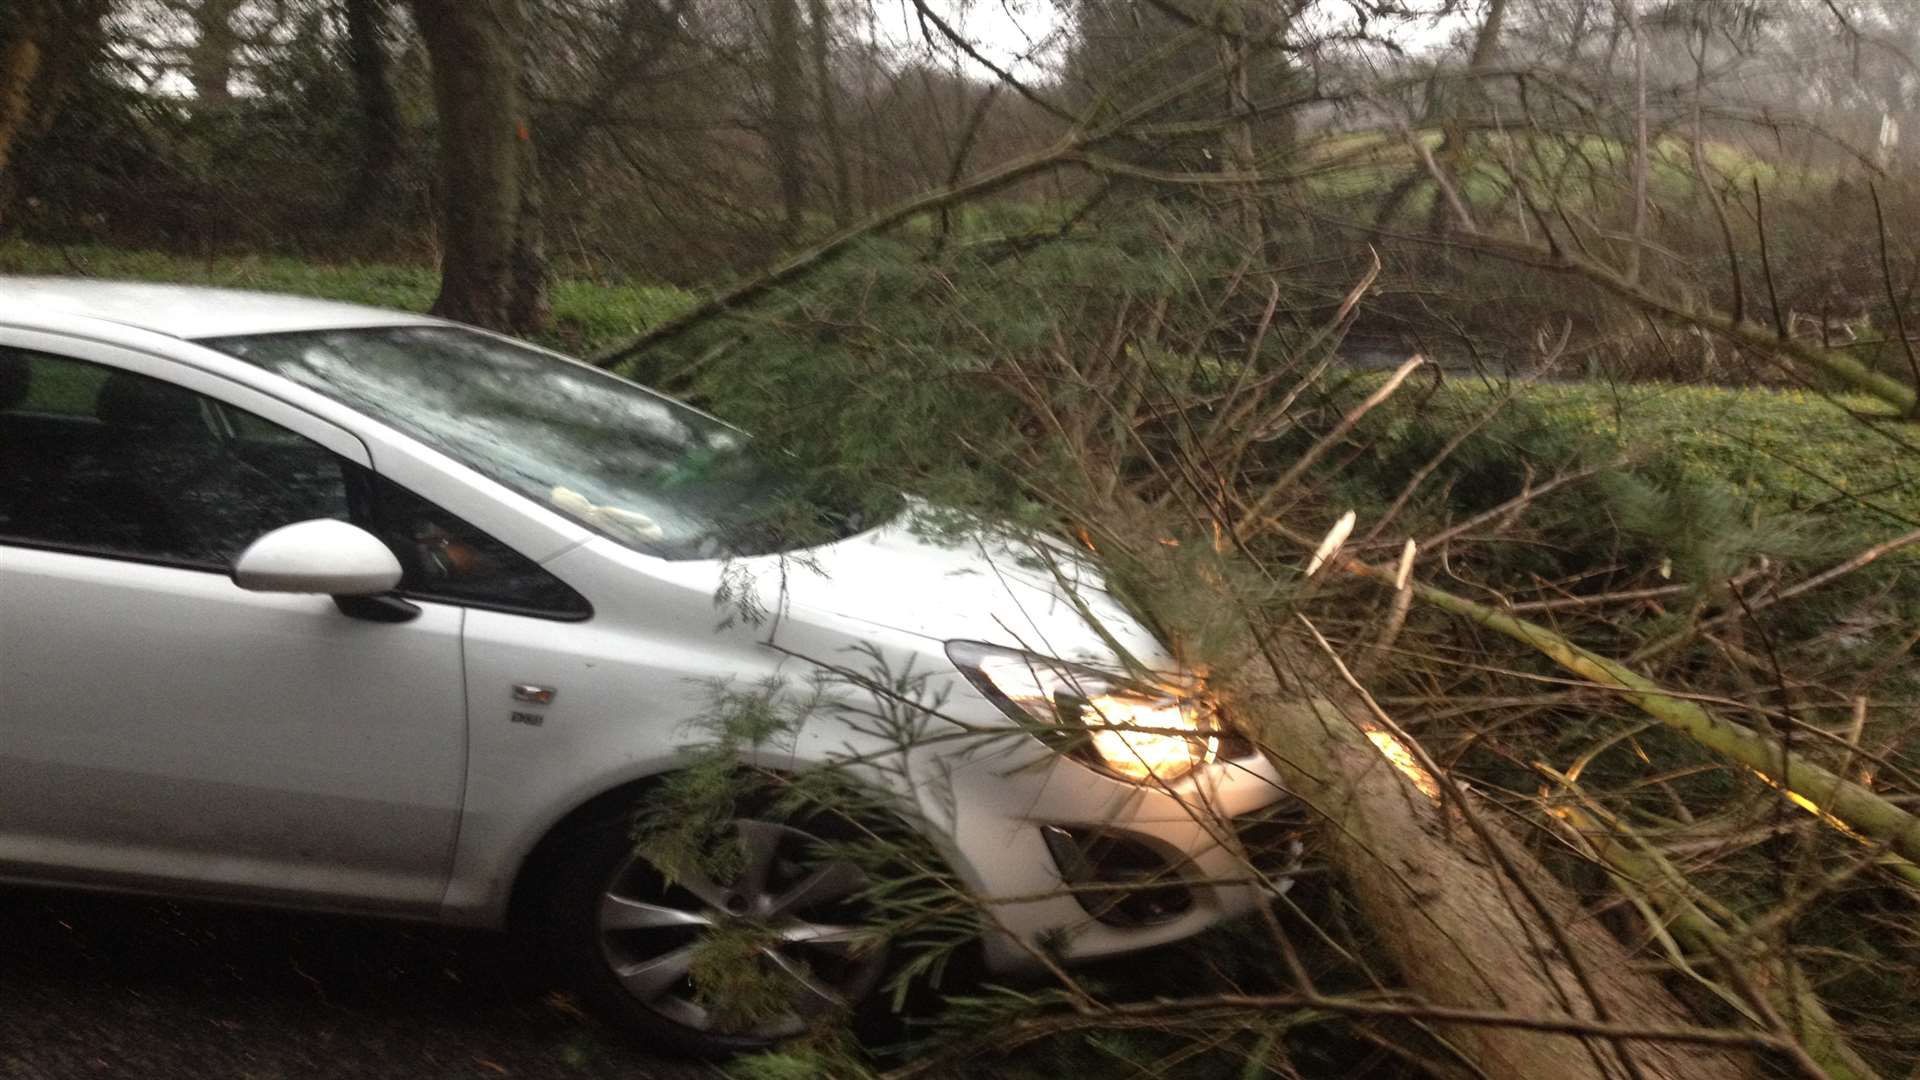 A tree fell on Tracey Cox's car during freak weather